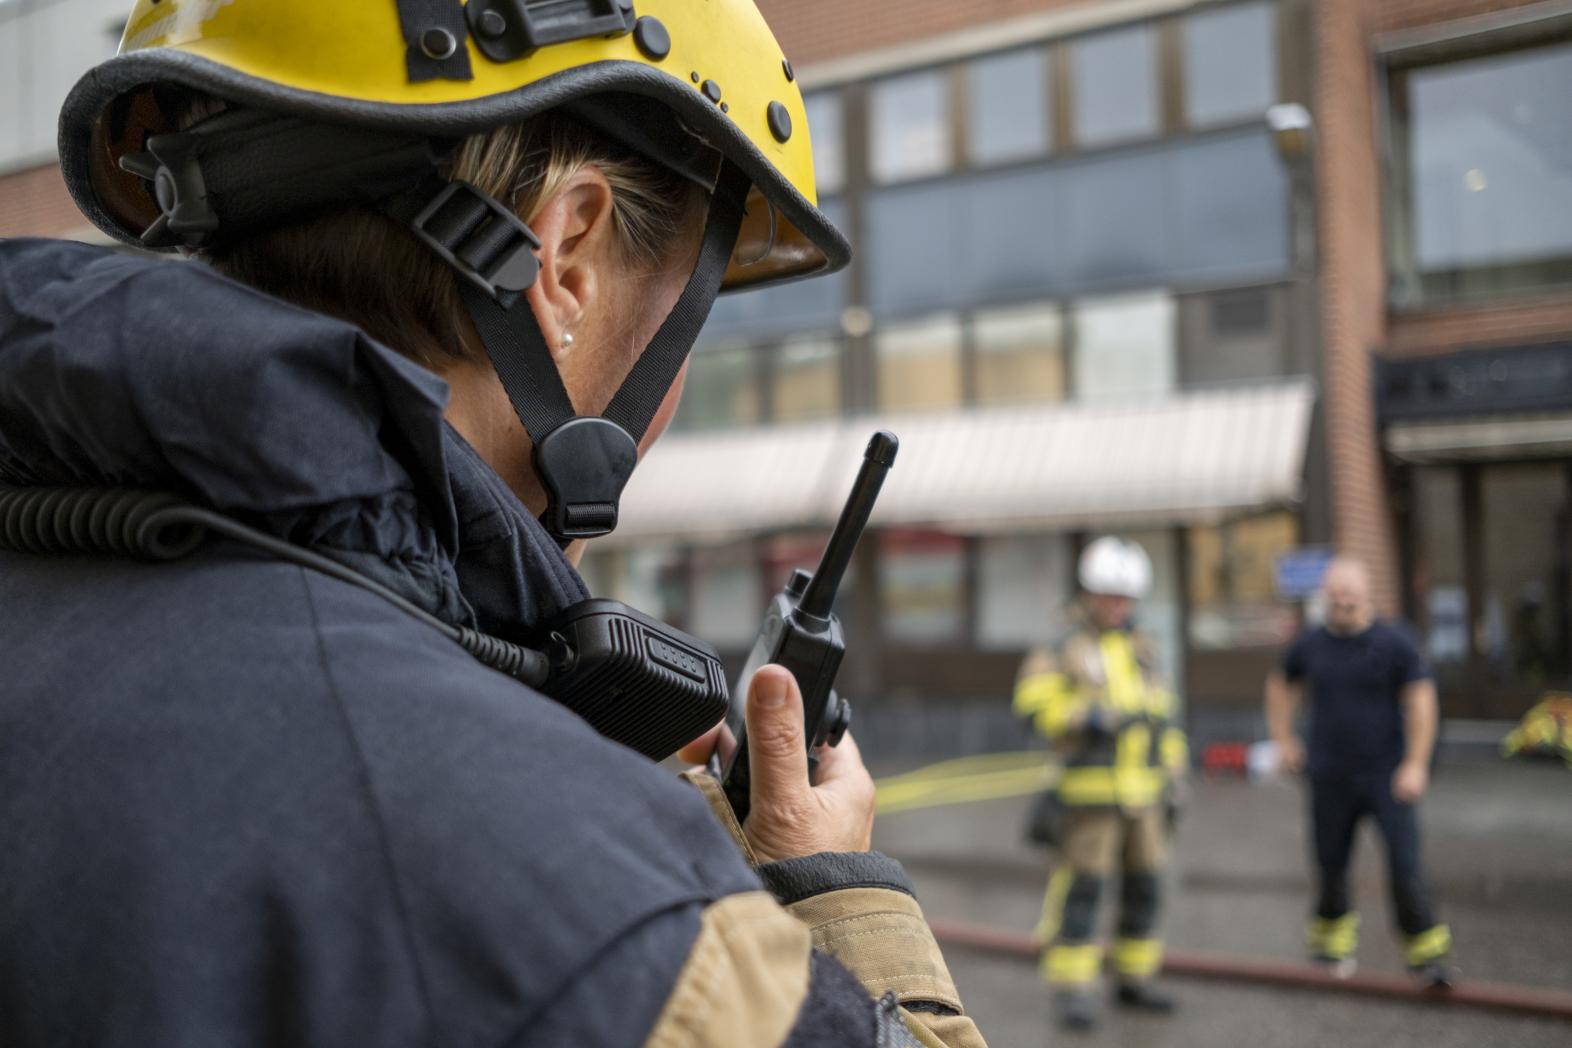 First responders using emergency communication systems